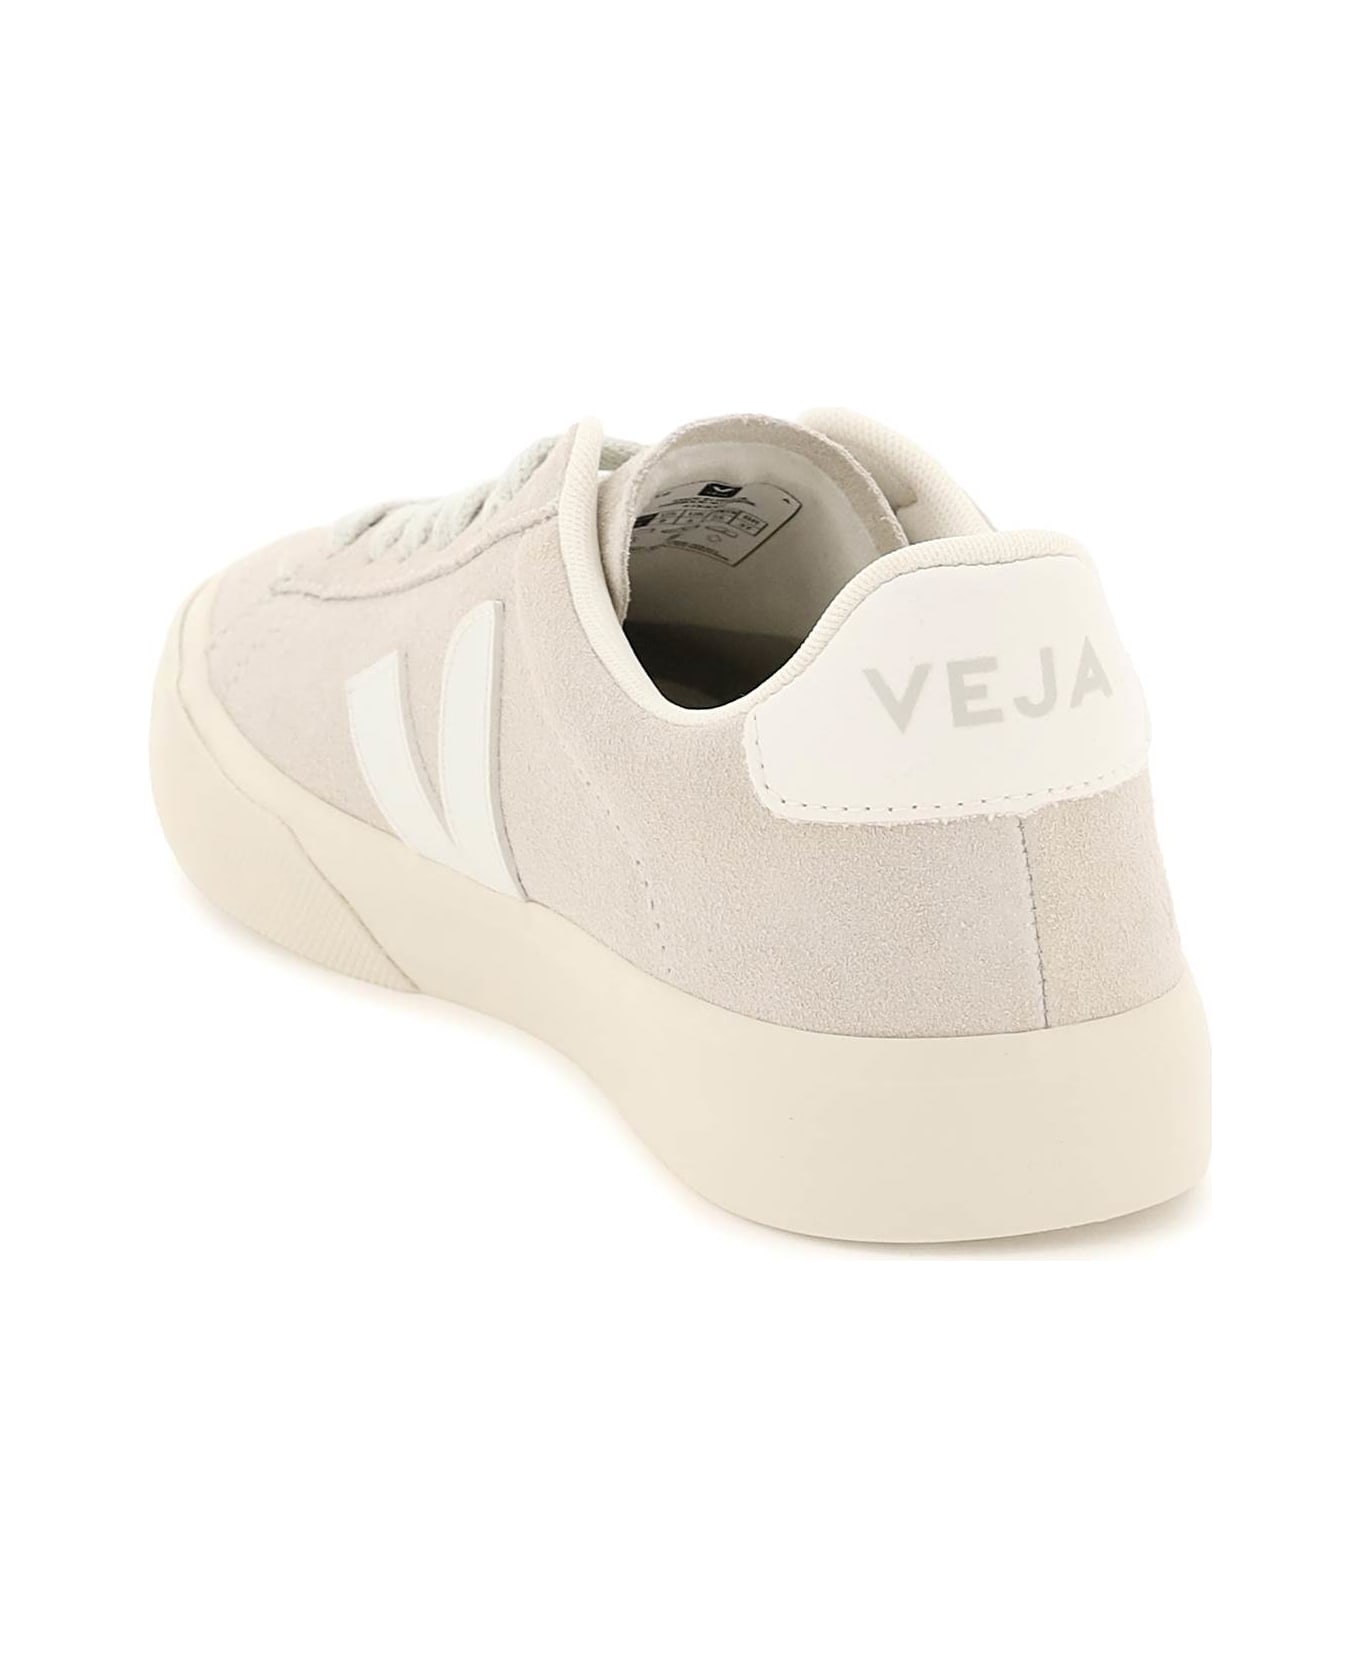 Veja Chromefree Leather Campo Sneakers - NATURAL WHITE (Grey)